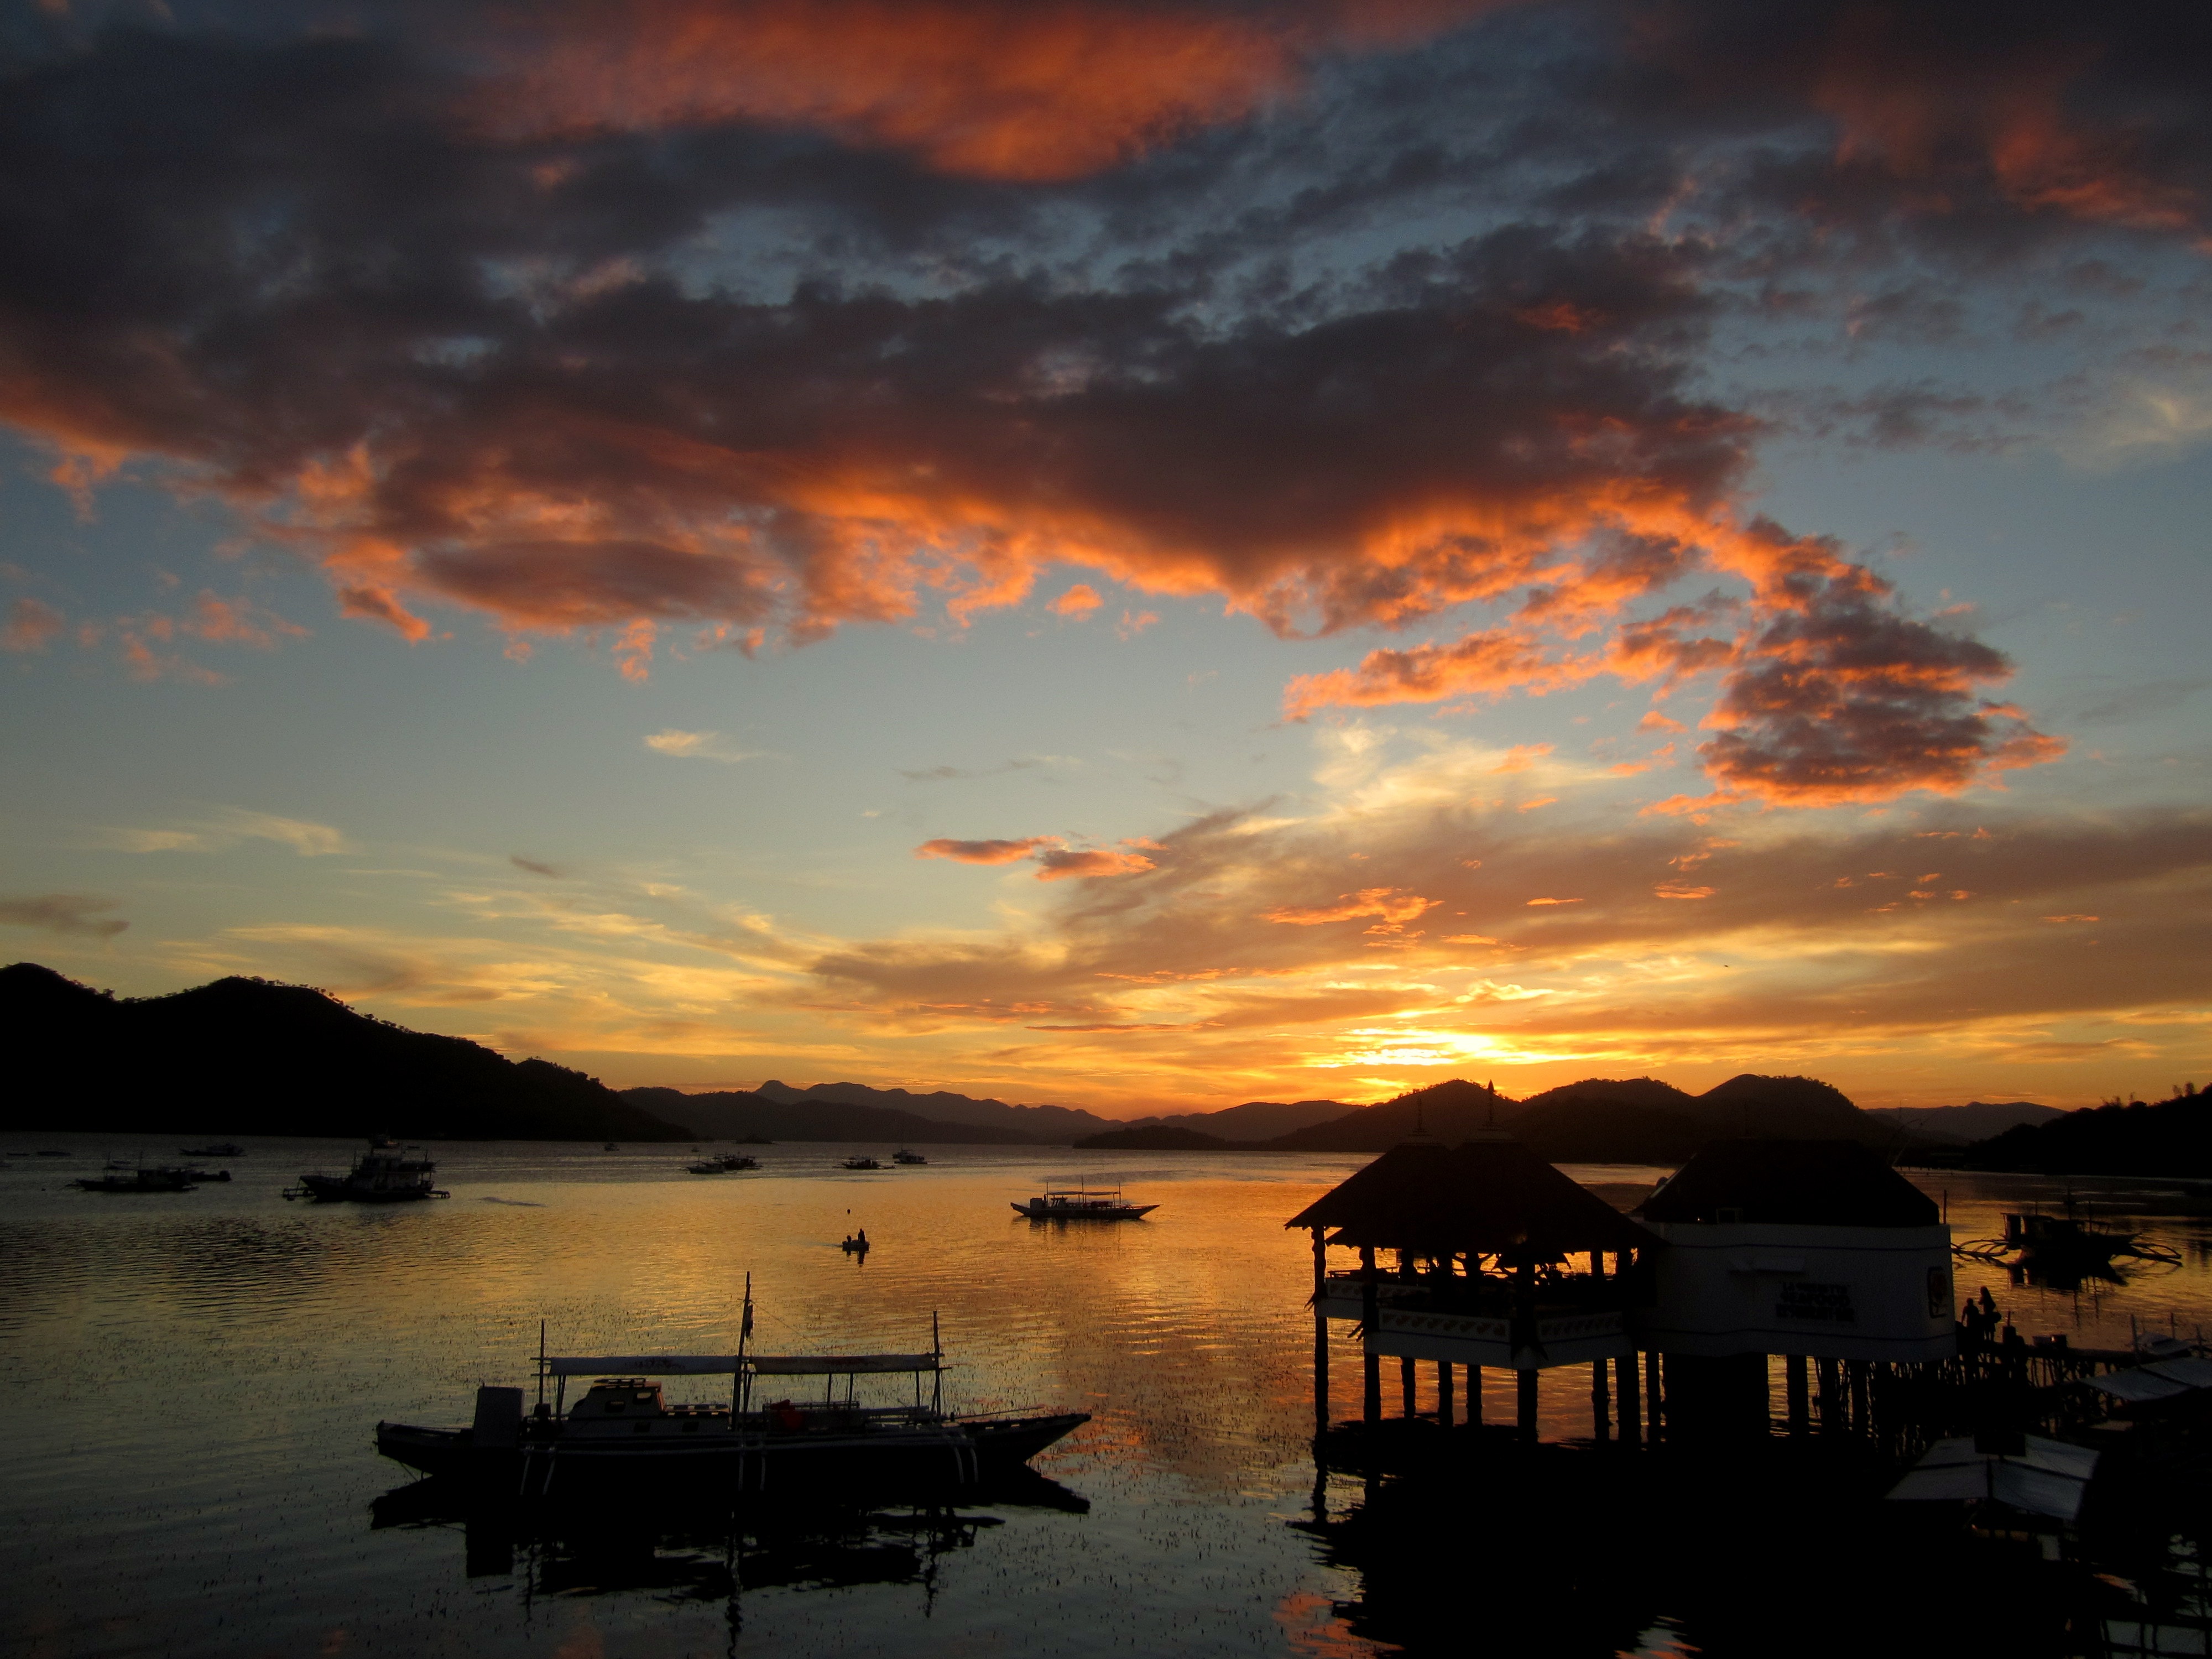 photo essay about sunset in the philippines